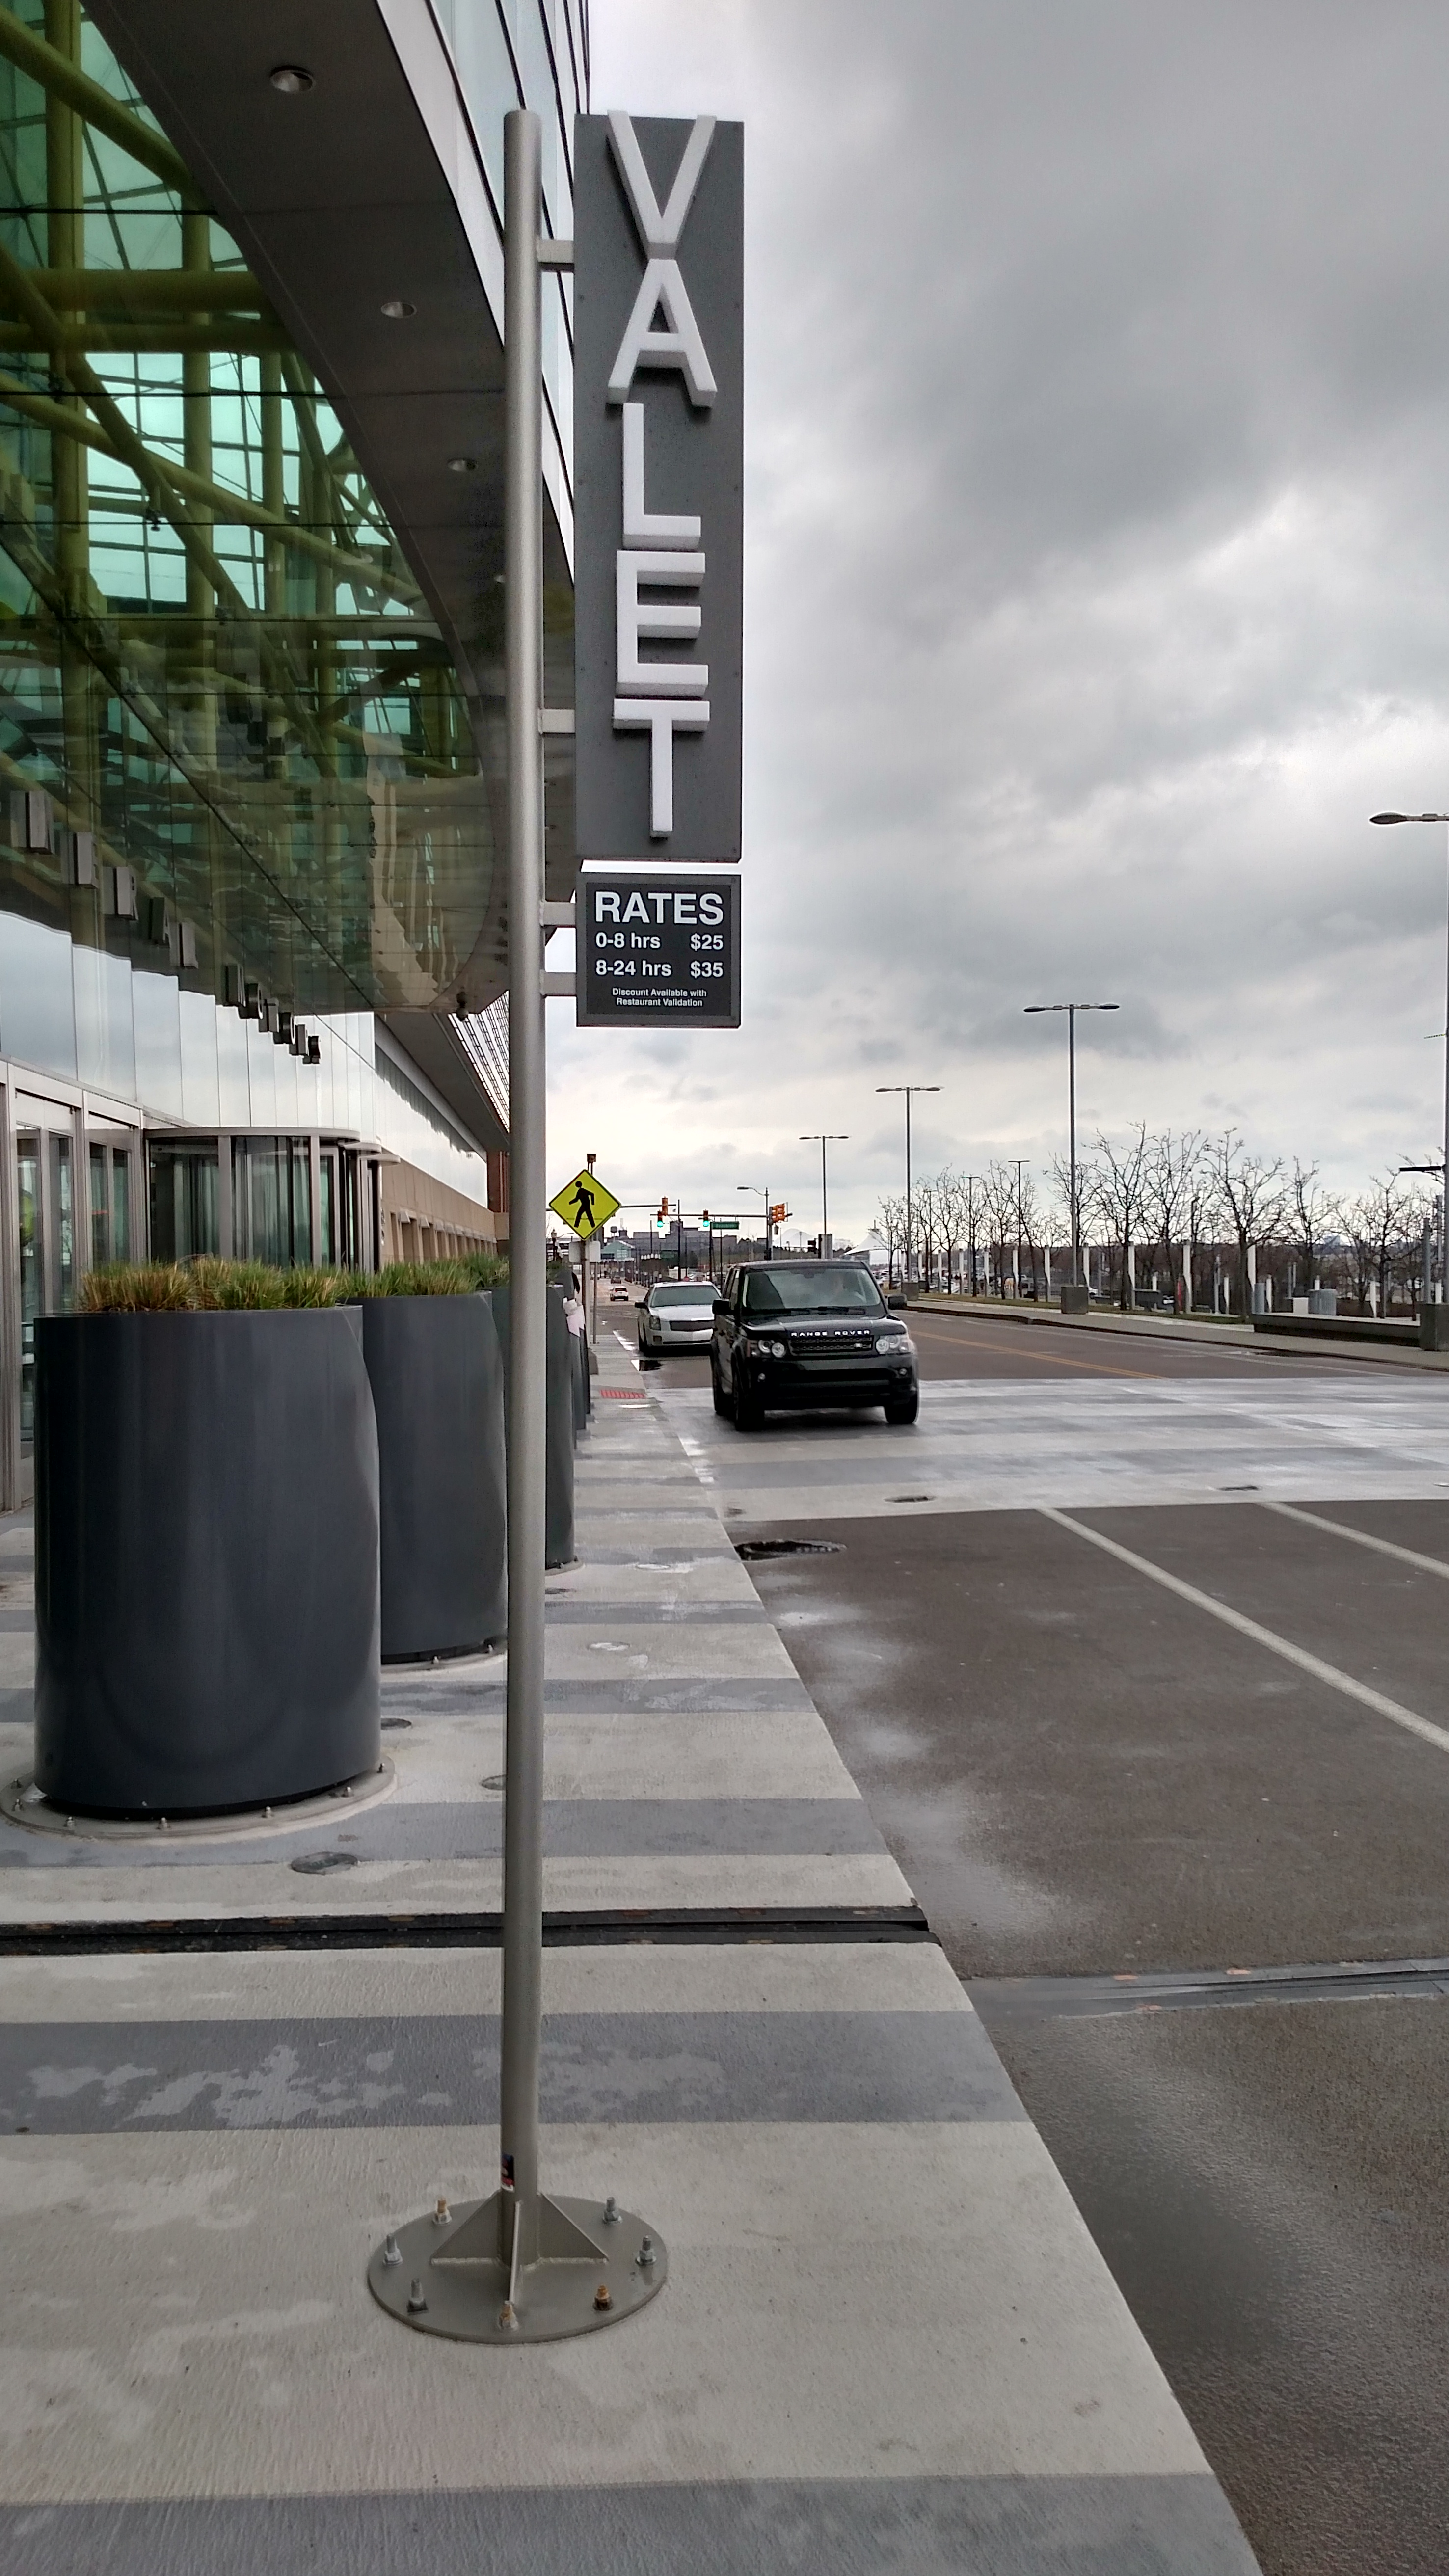 VALET pole sign mounted to ground in detroit